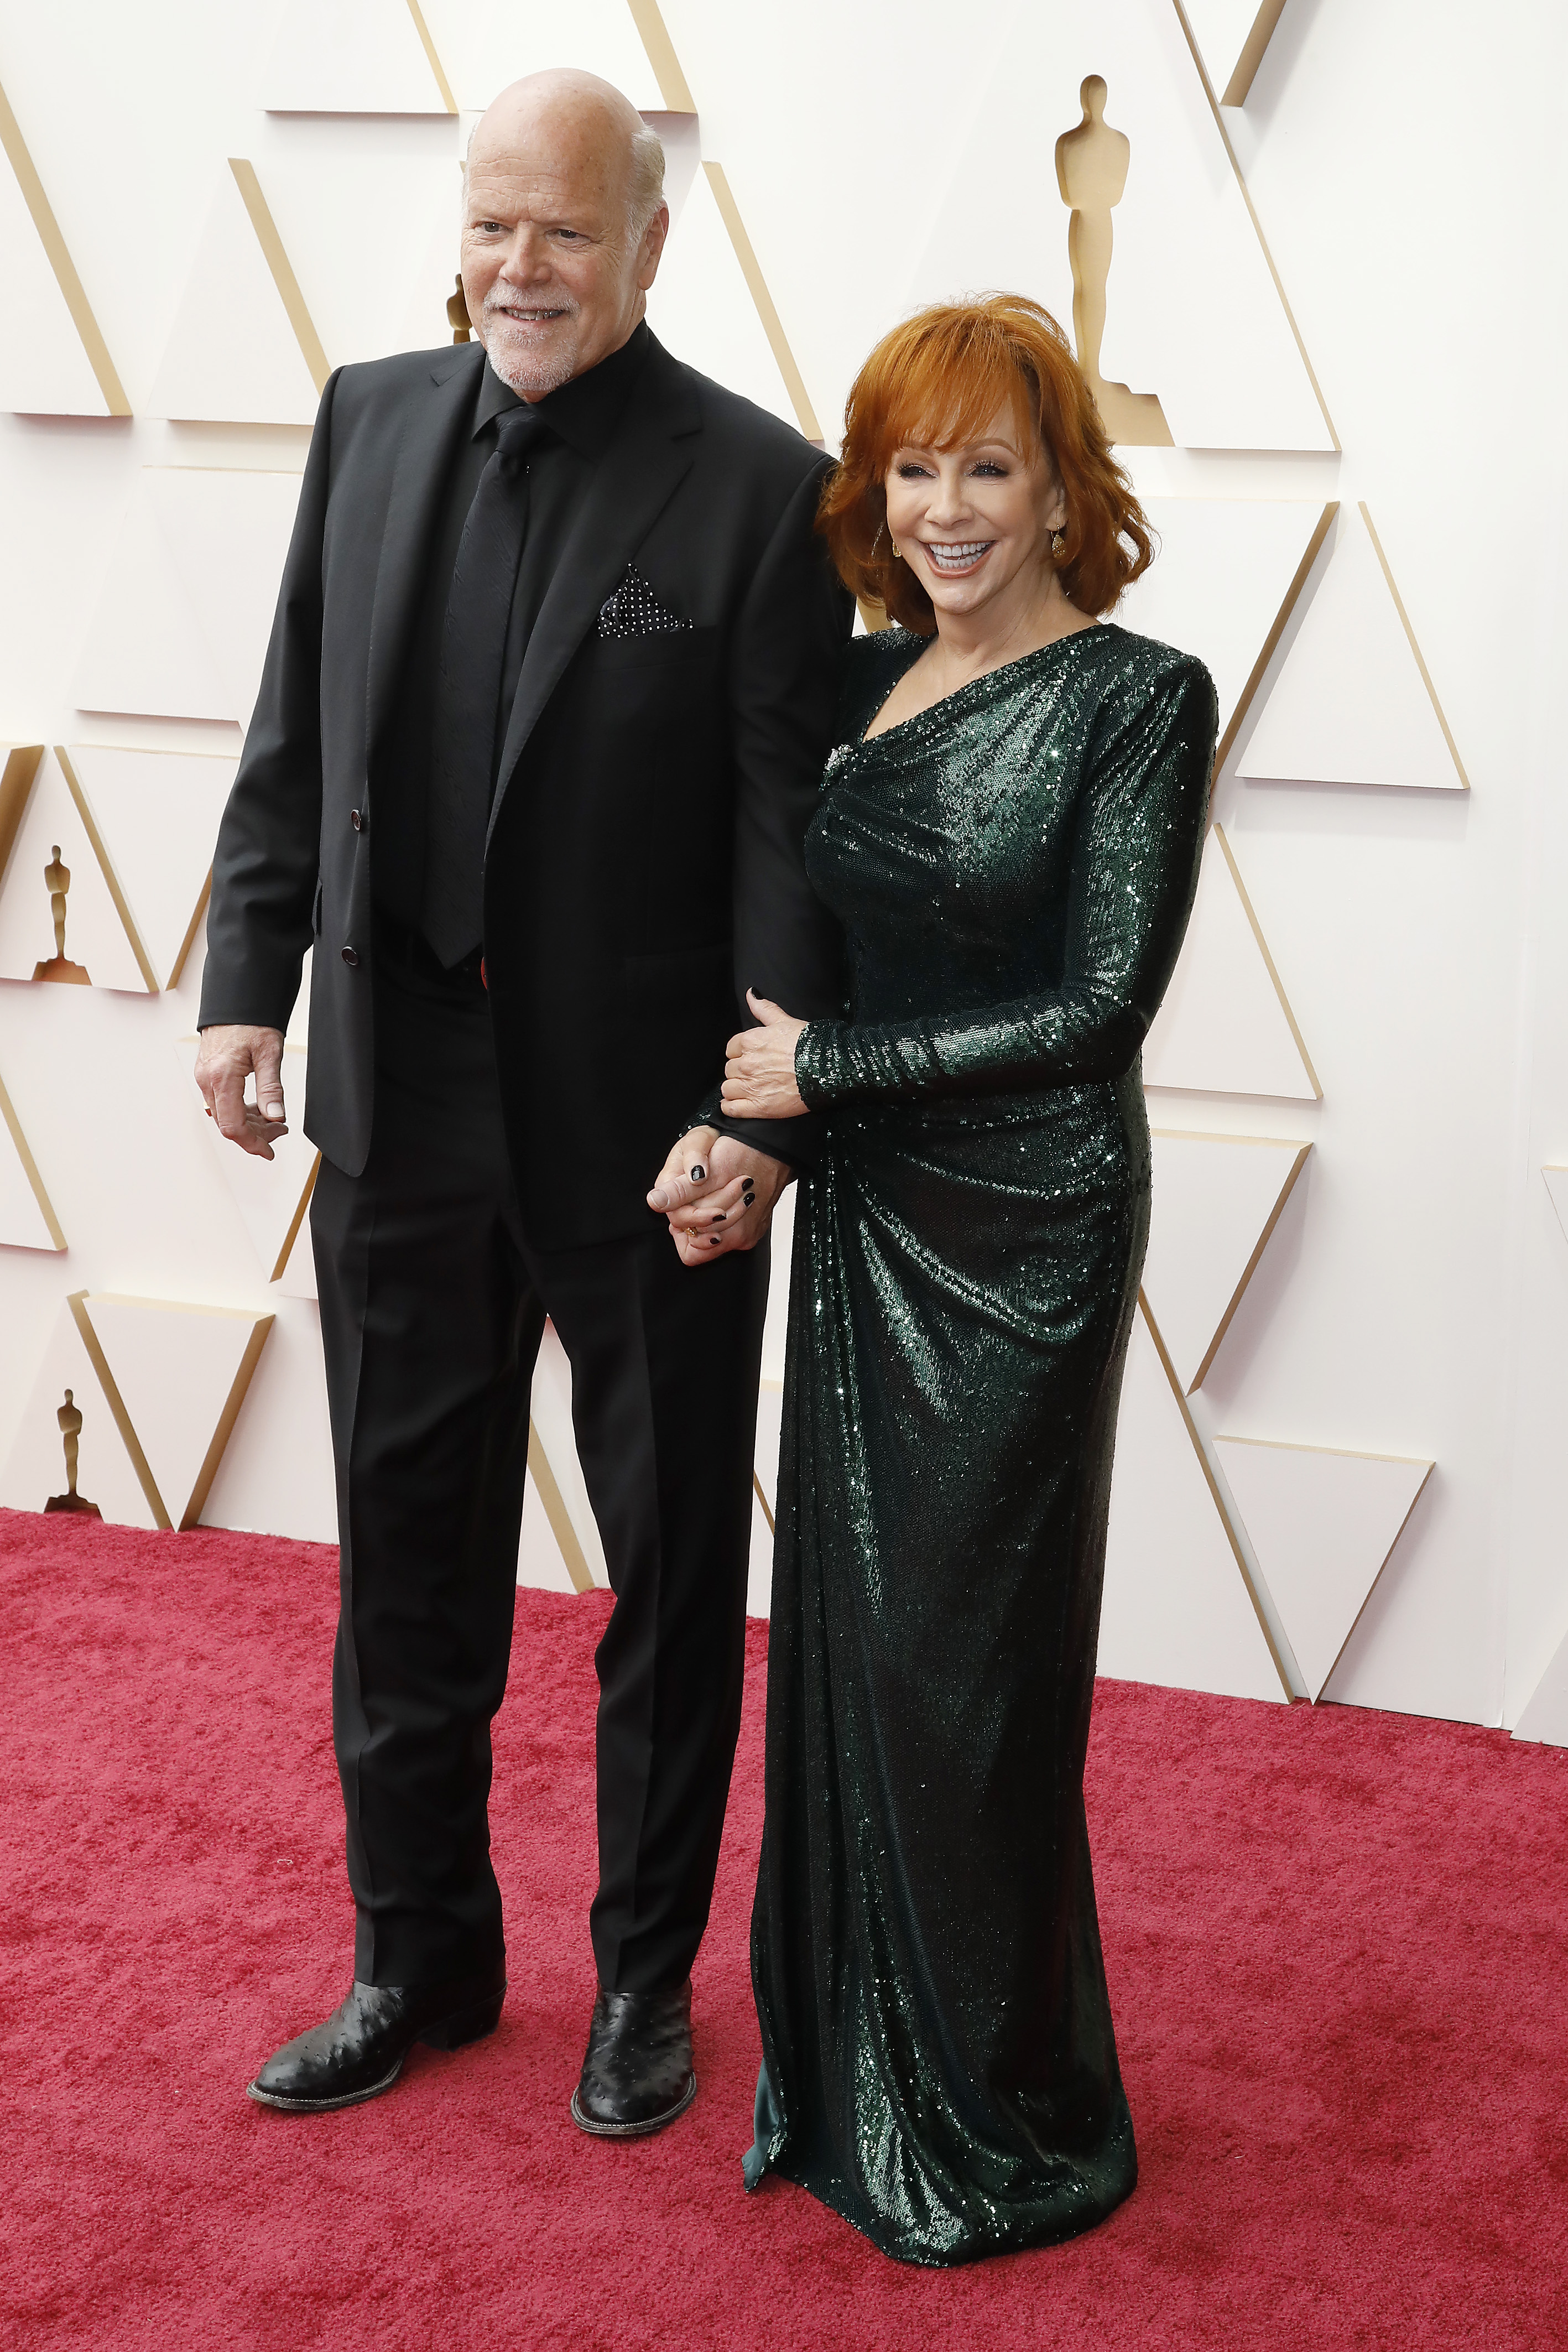 Rex Linn and Reba McEntire in Los Angeles in 2022 | Source: Getty Images